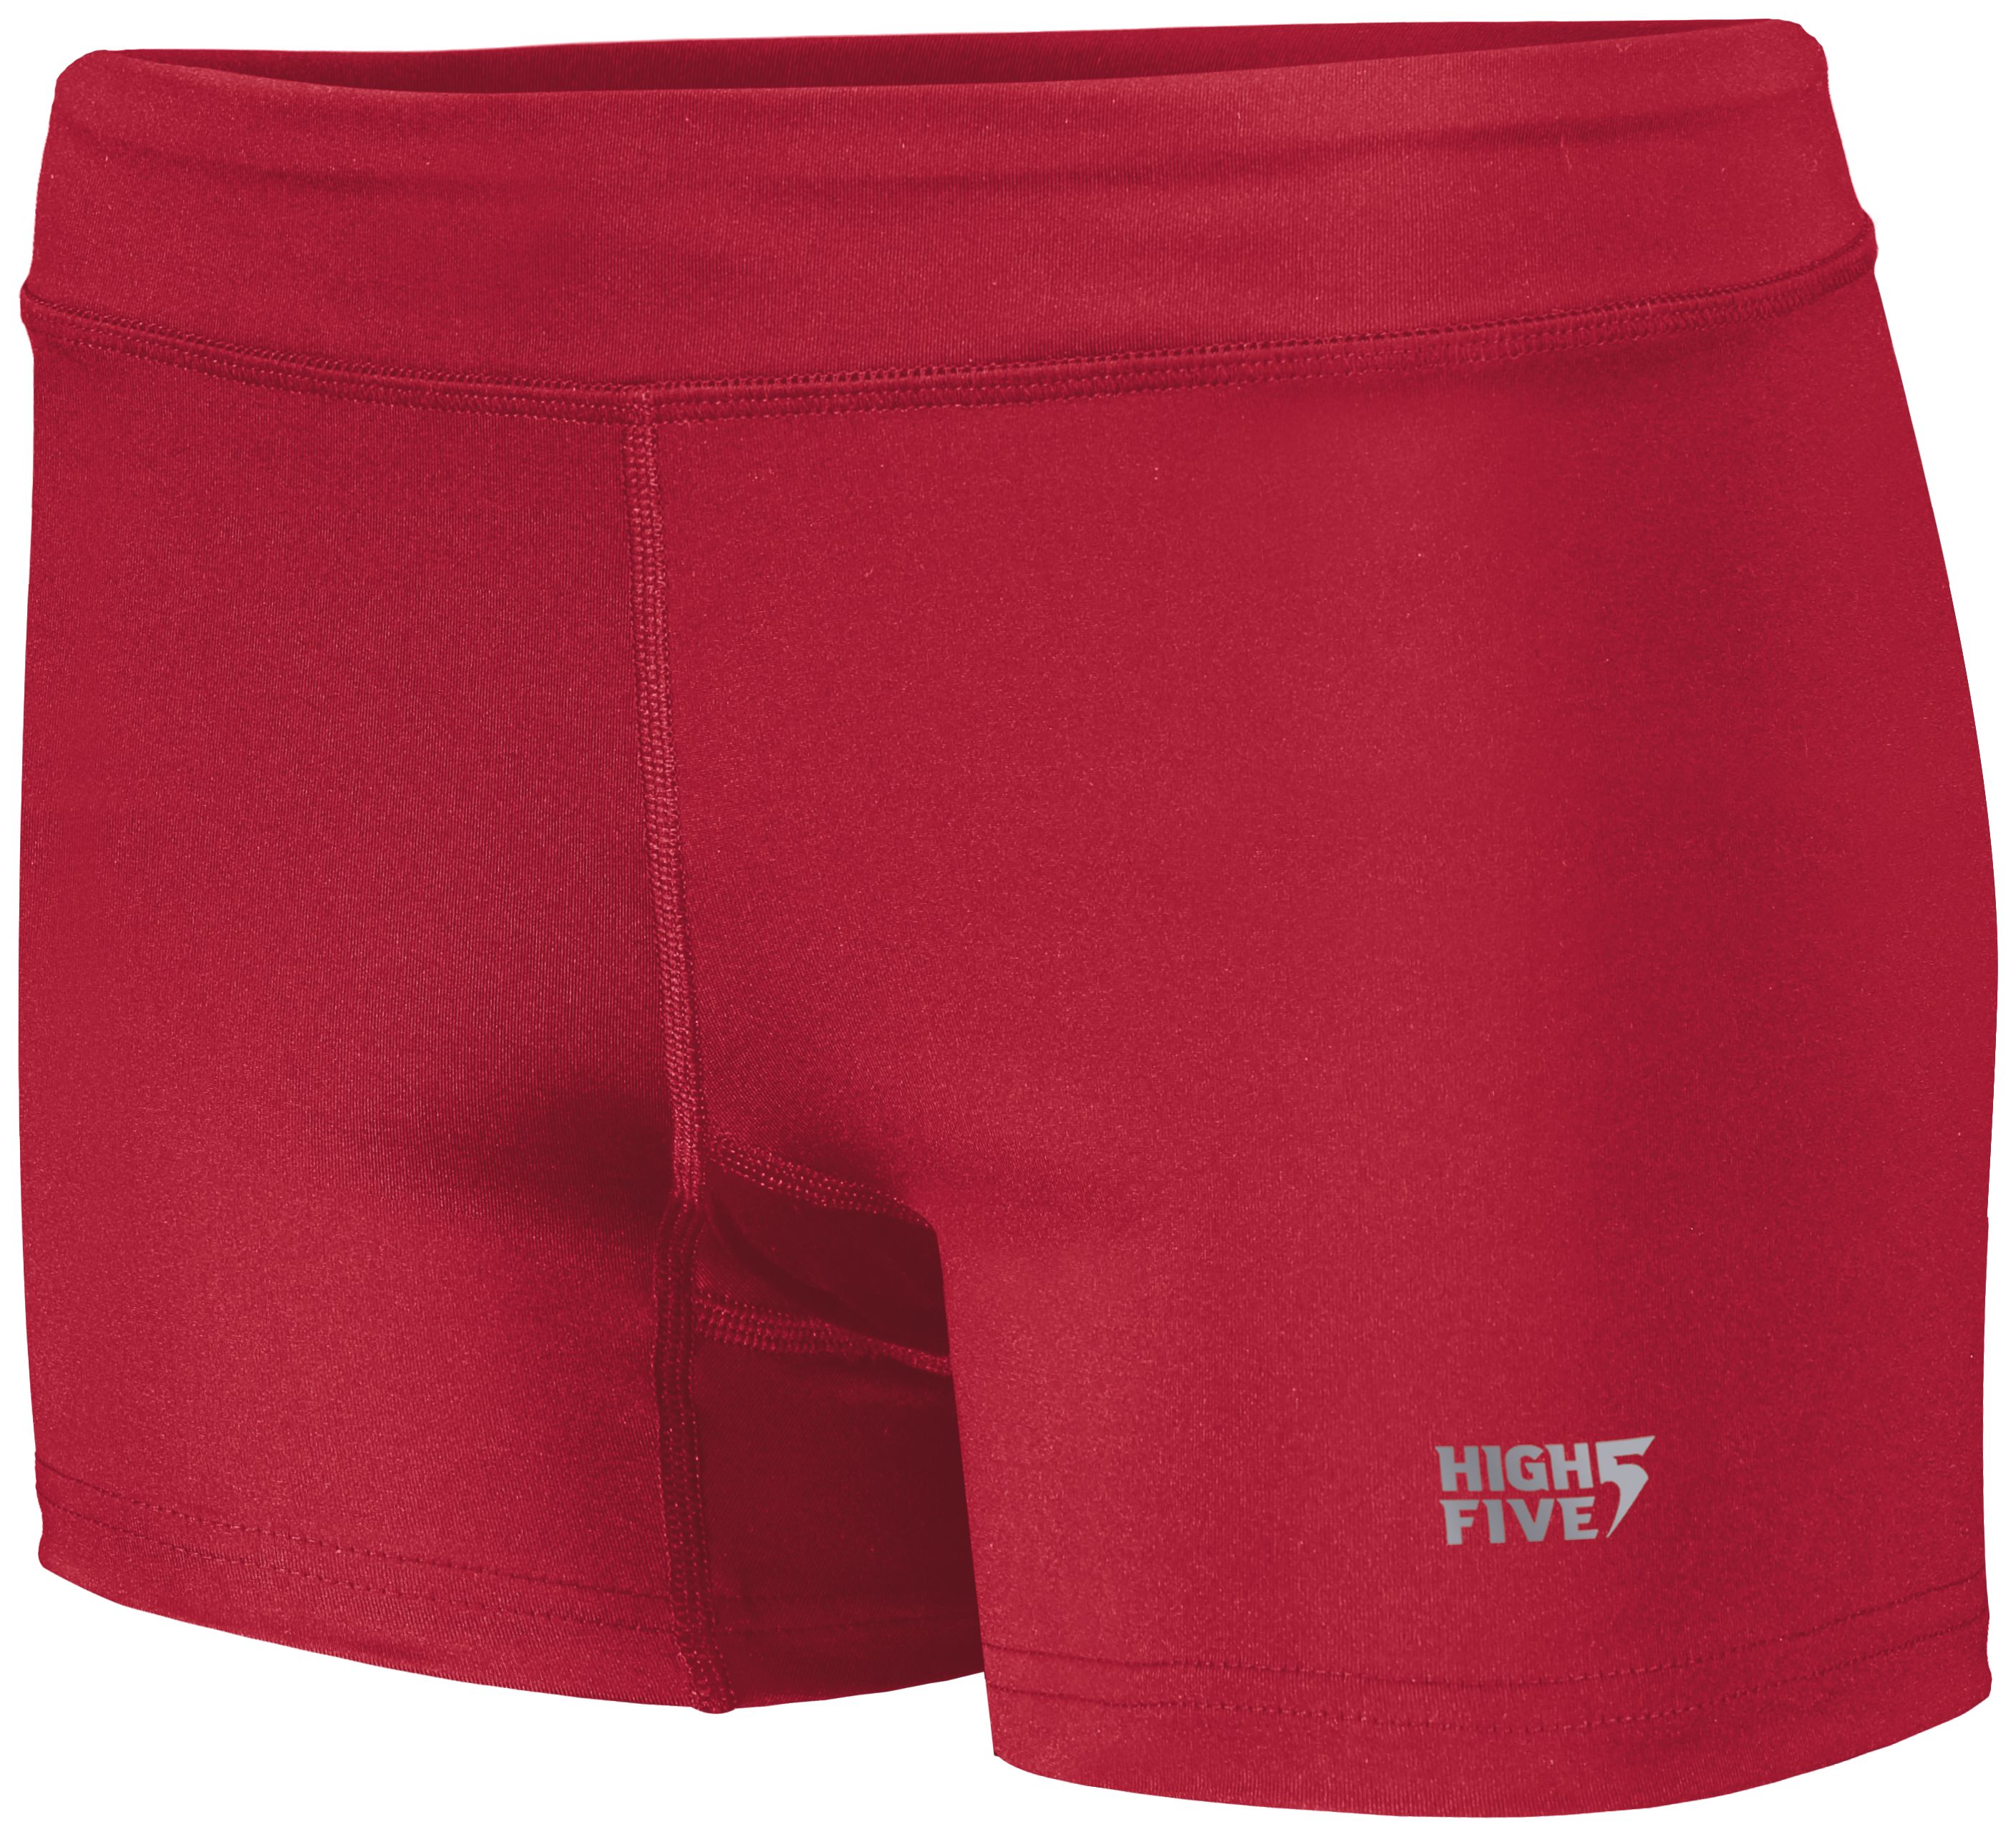 High Five 345592 - Ladies Truhit Volleyball Shorts